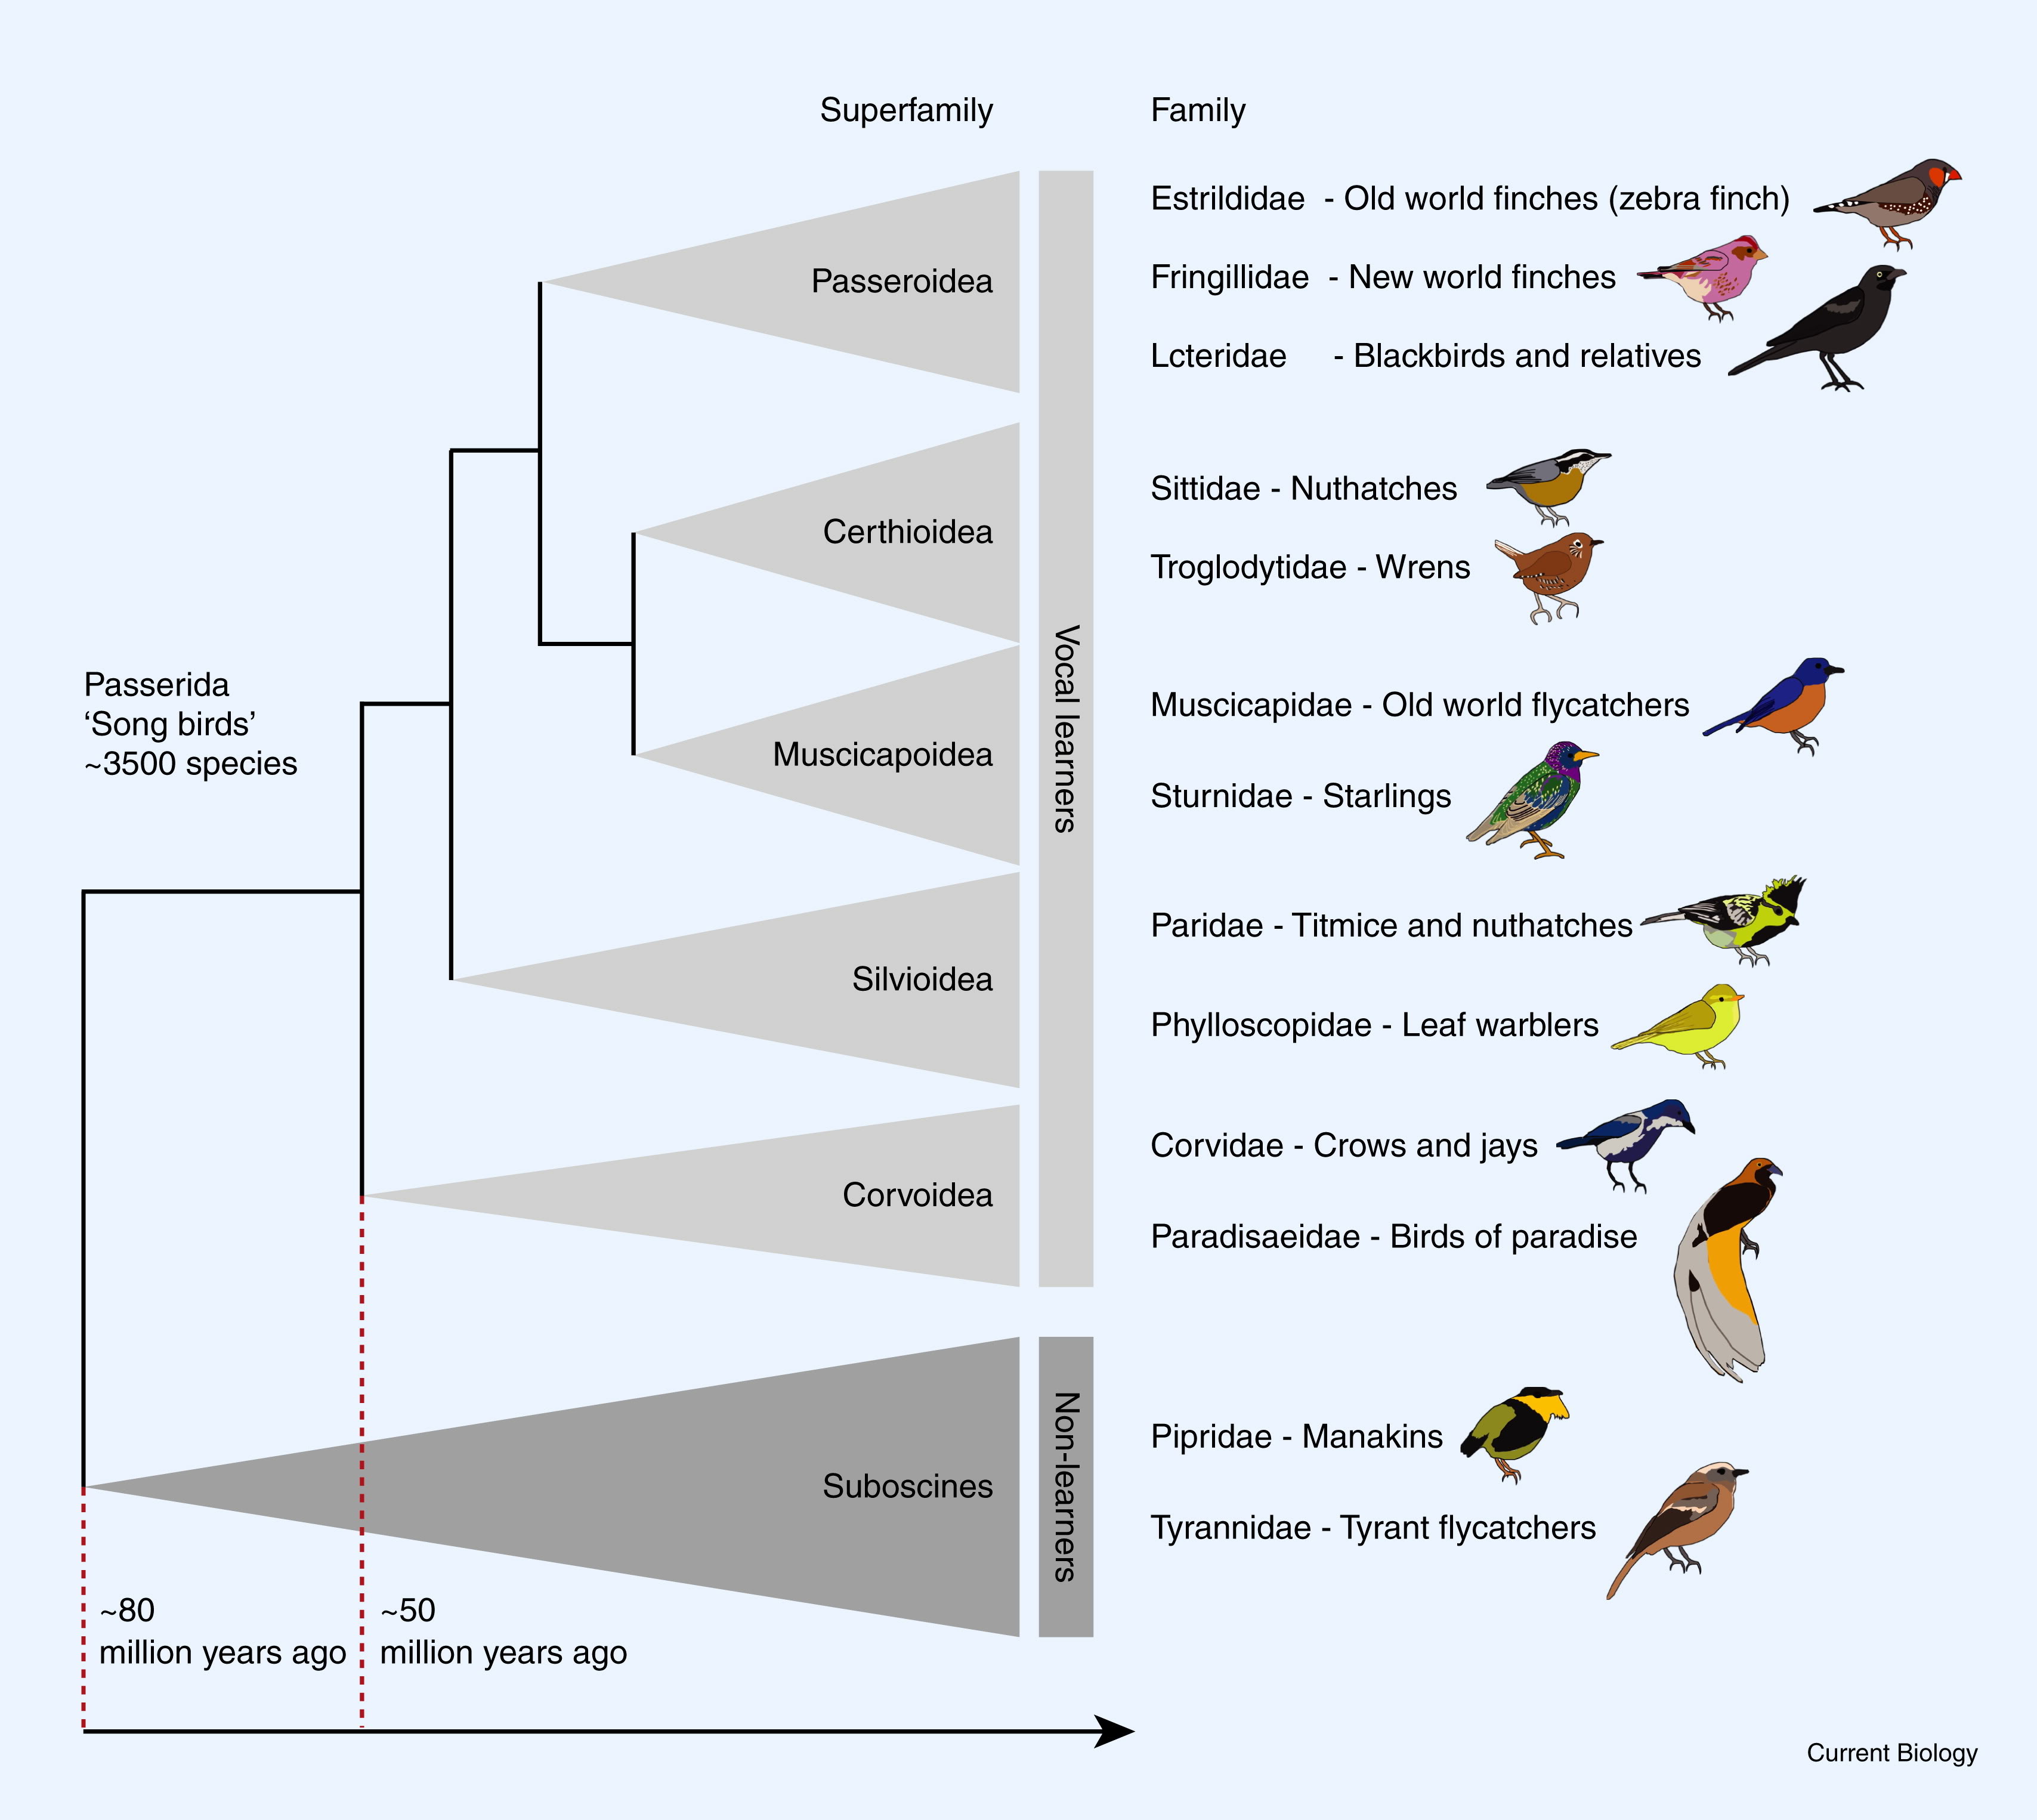 Know the song birds family tree with over 3500 species this past 80 million years ago. You can see the birds species from vocal learners up to non learners. Vocal […]